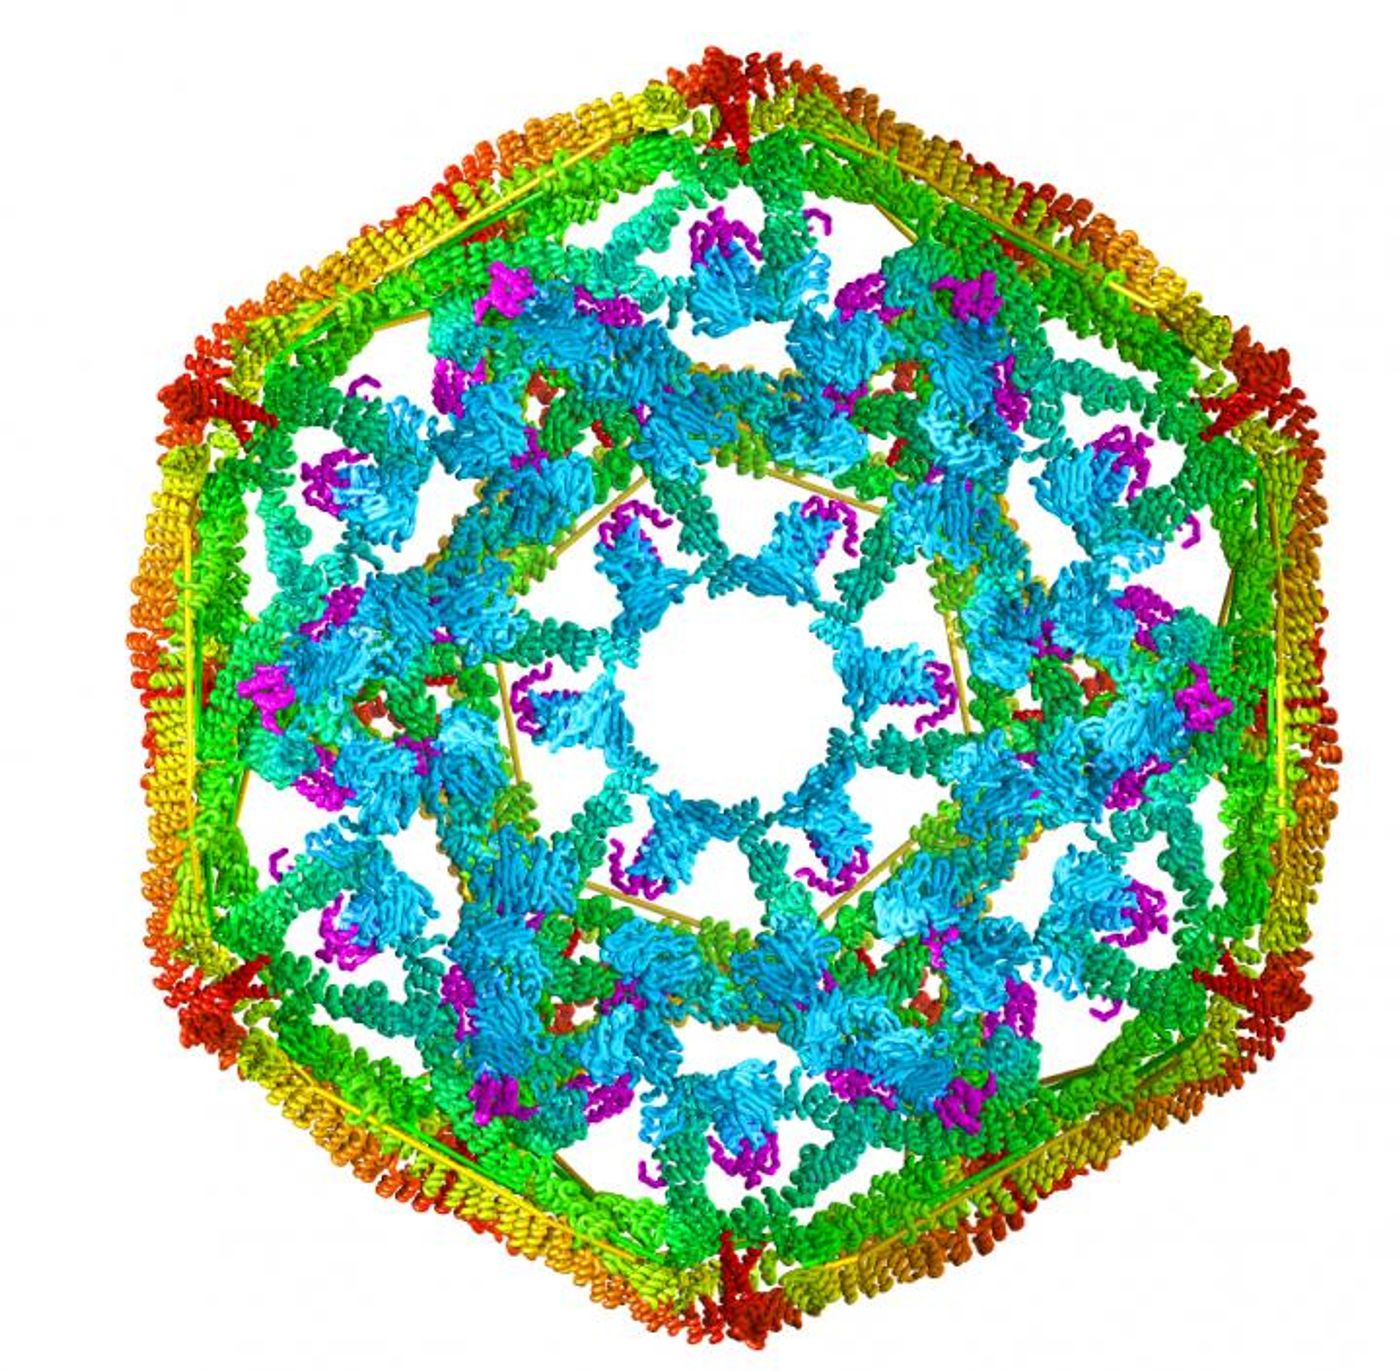 This is a model of the structure of clathrin, a protein that researchers at The University of Texas Health Science Center at San Antonio used to study how a heat shock protein disassembles protein complexes. / Credit: Drs. Eileen Lafer and Rui Sousa/UT Health Science Center at San Antonio